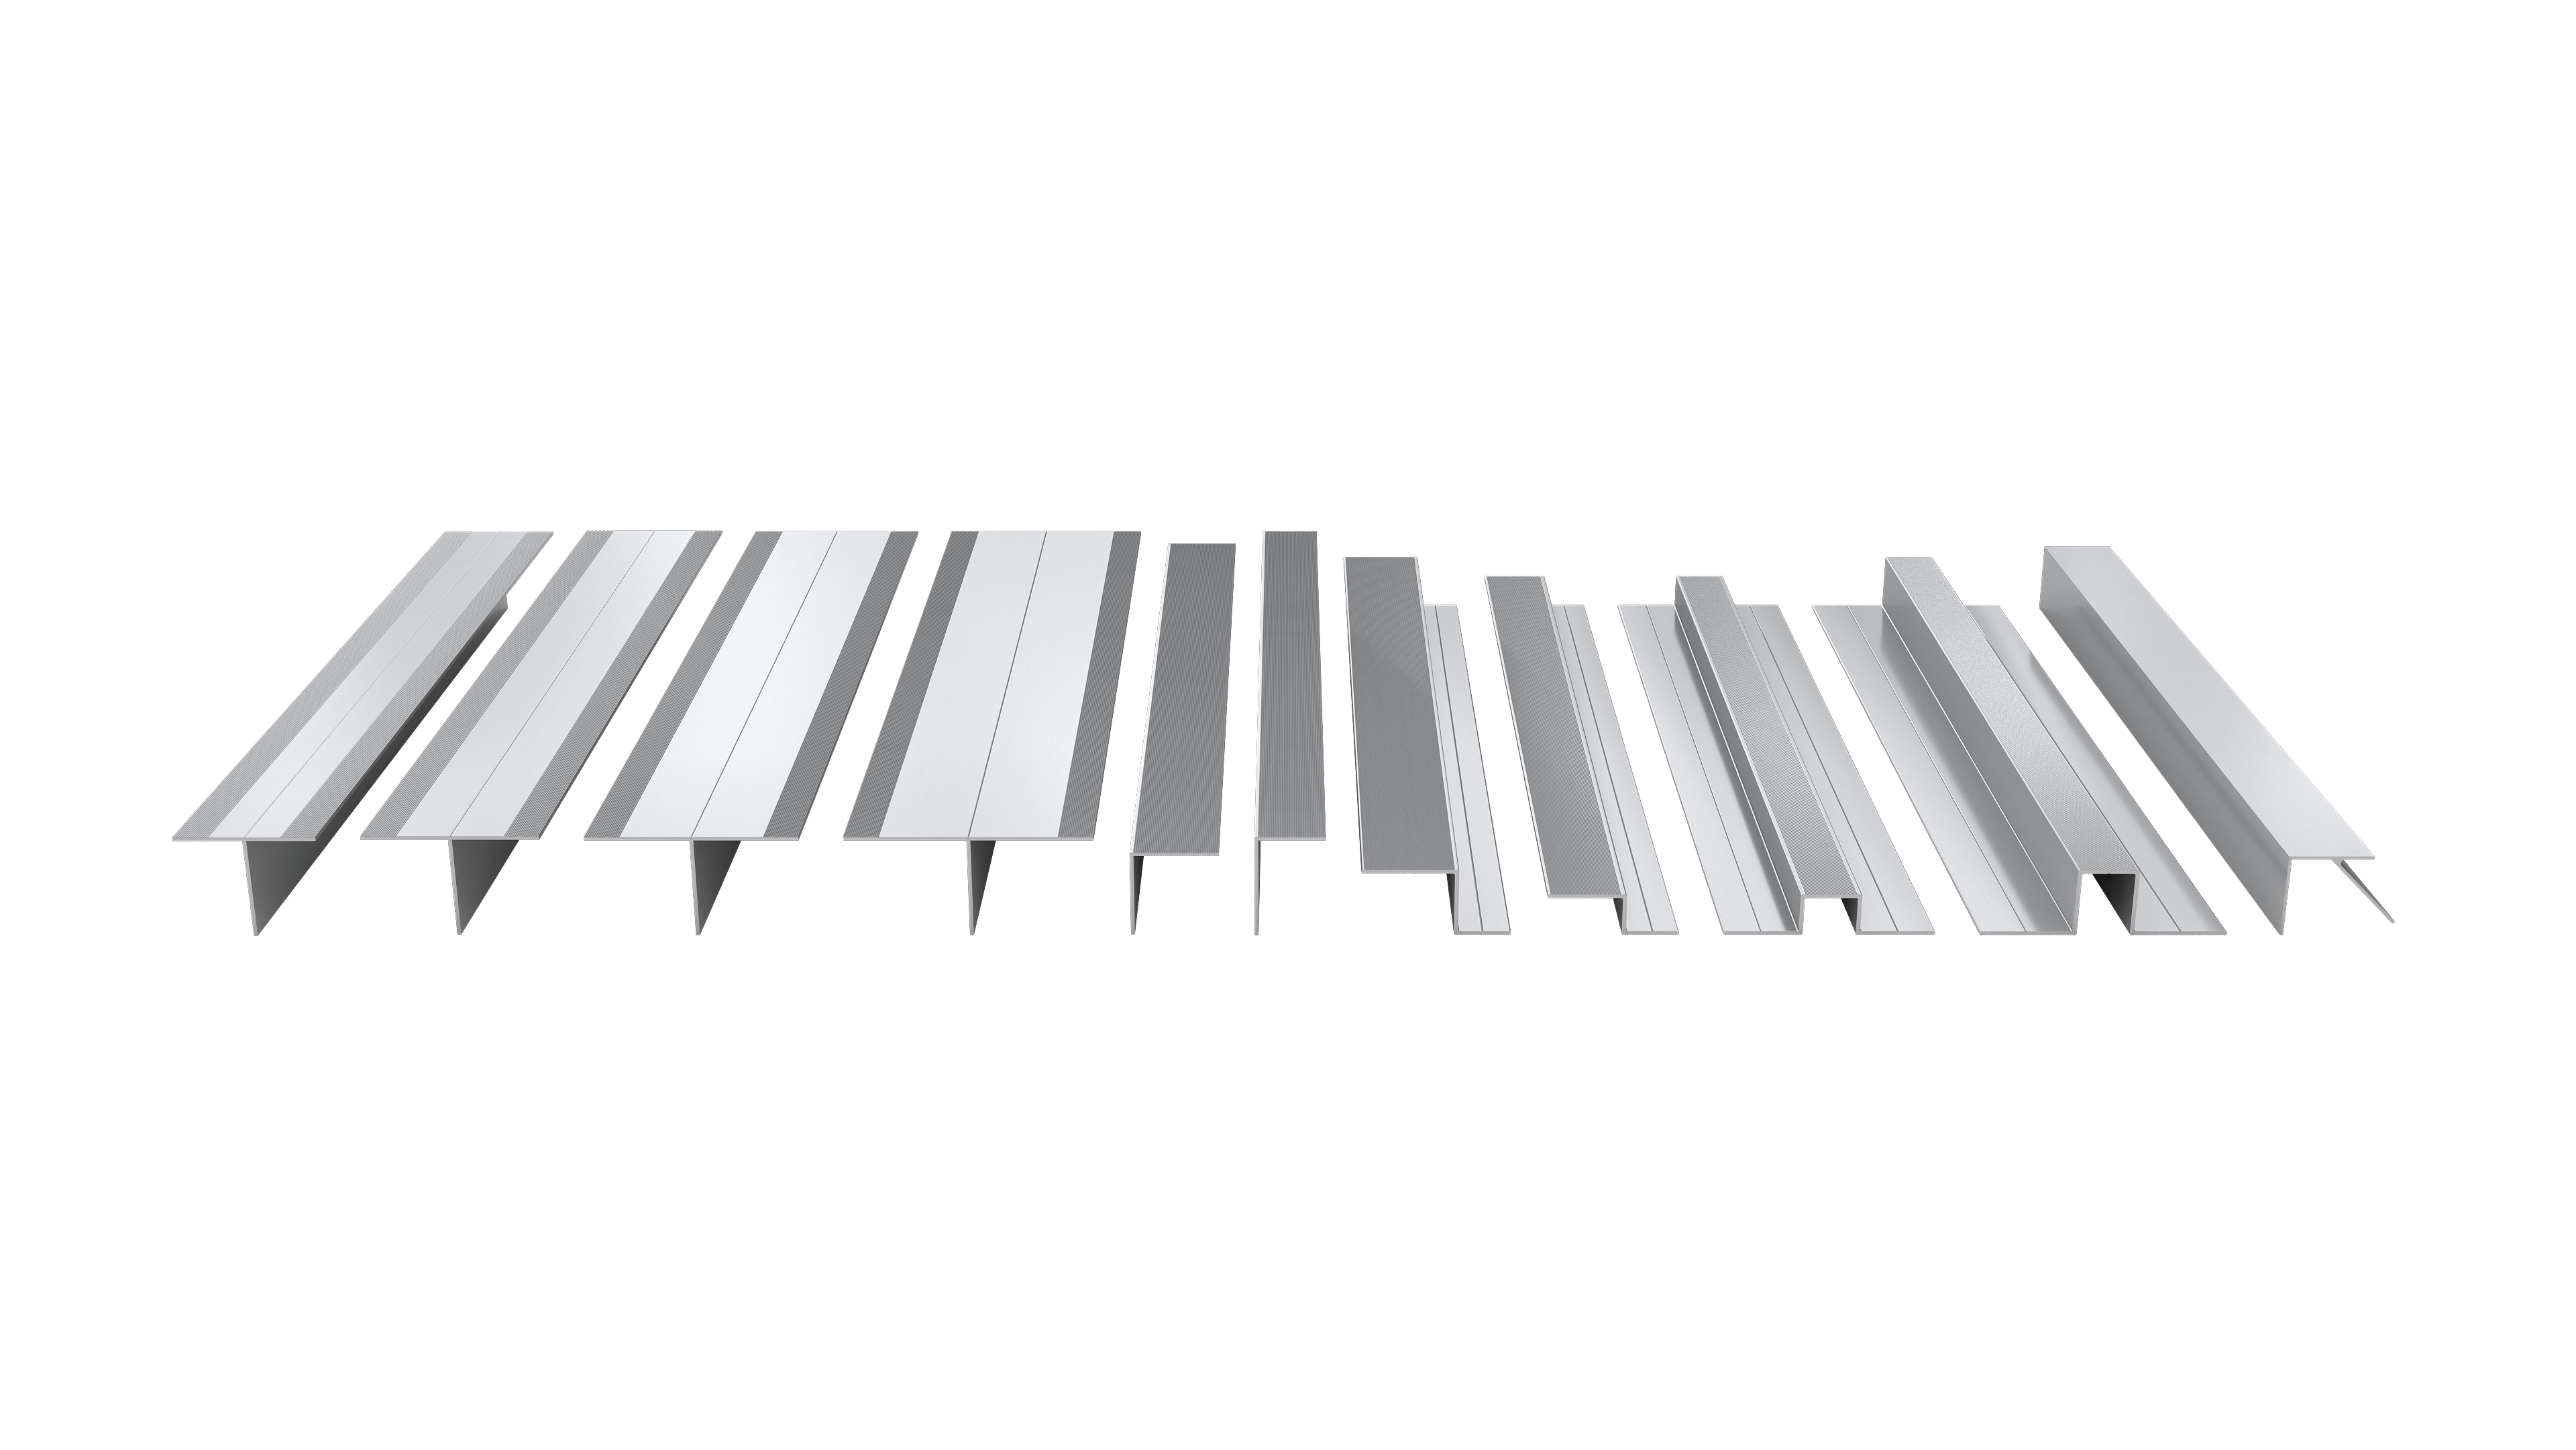 Cladmate Profiles and Rails for cladding support systems